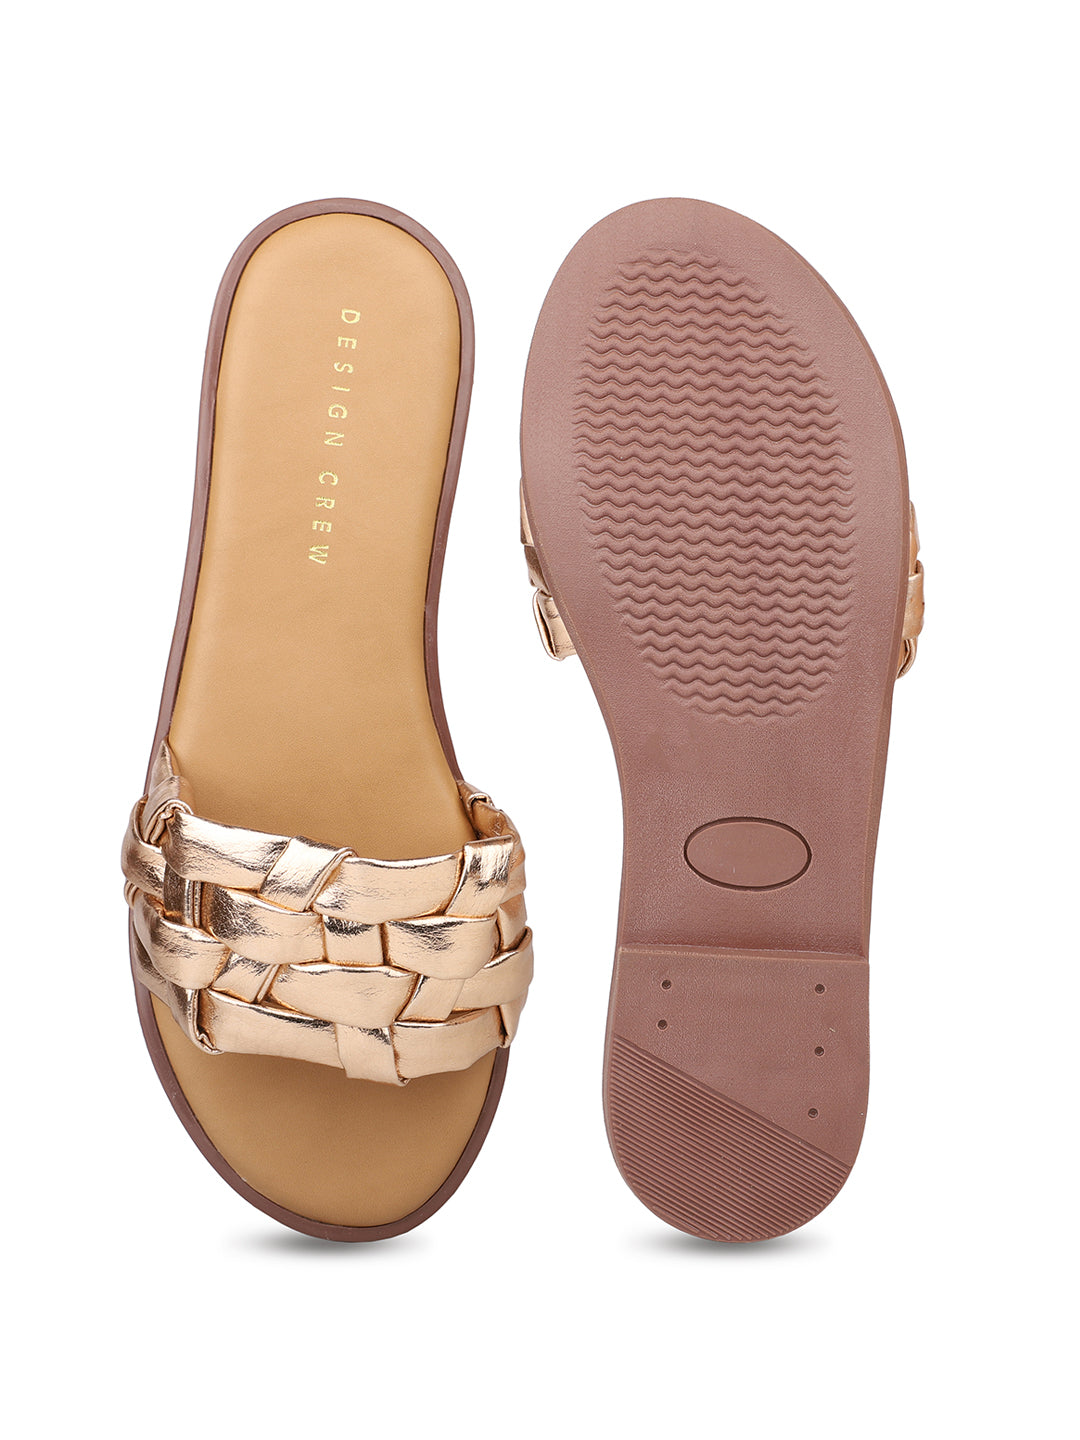 Braided Metallic Sandal on a Moulded Outsole